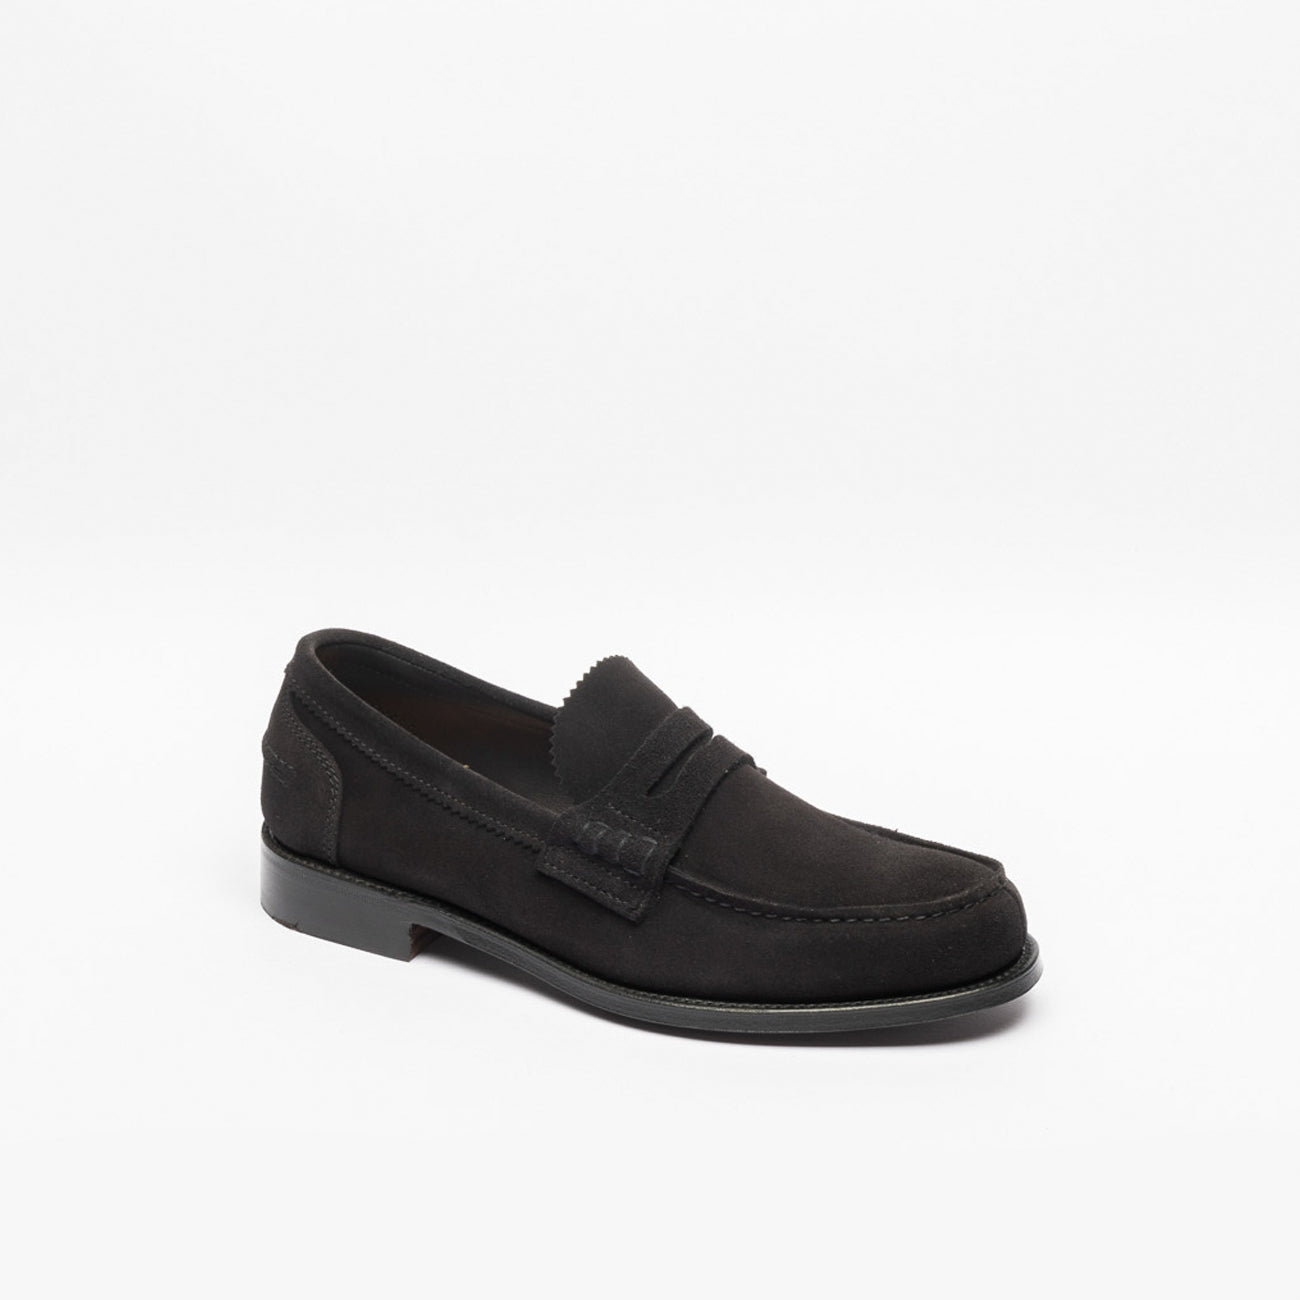 Cheaney Joseph & Sons black suede penny loafer